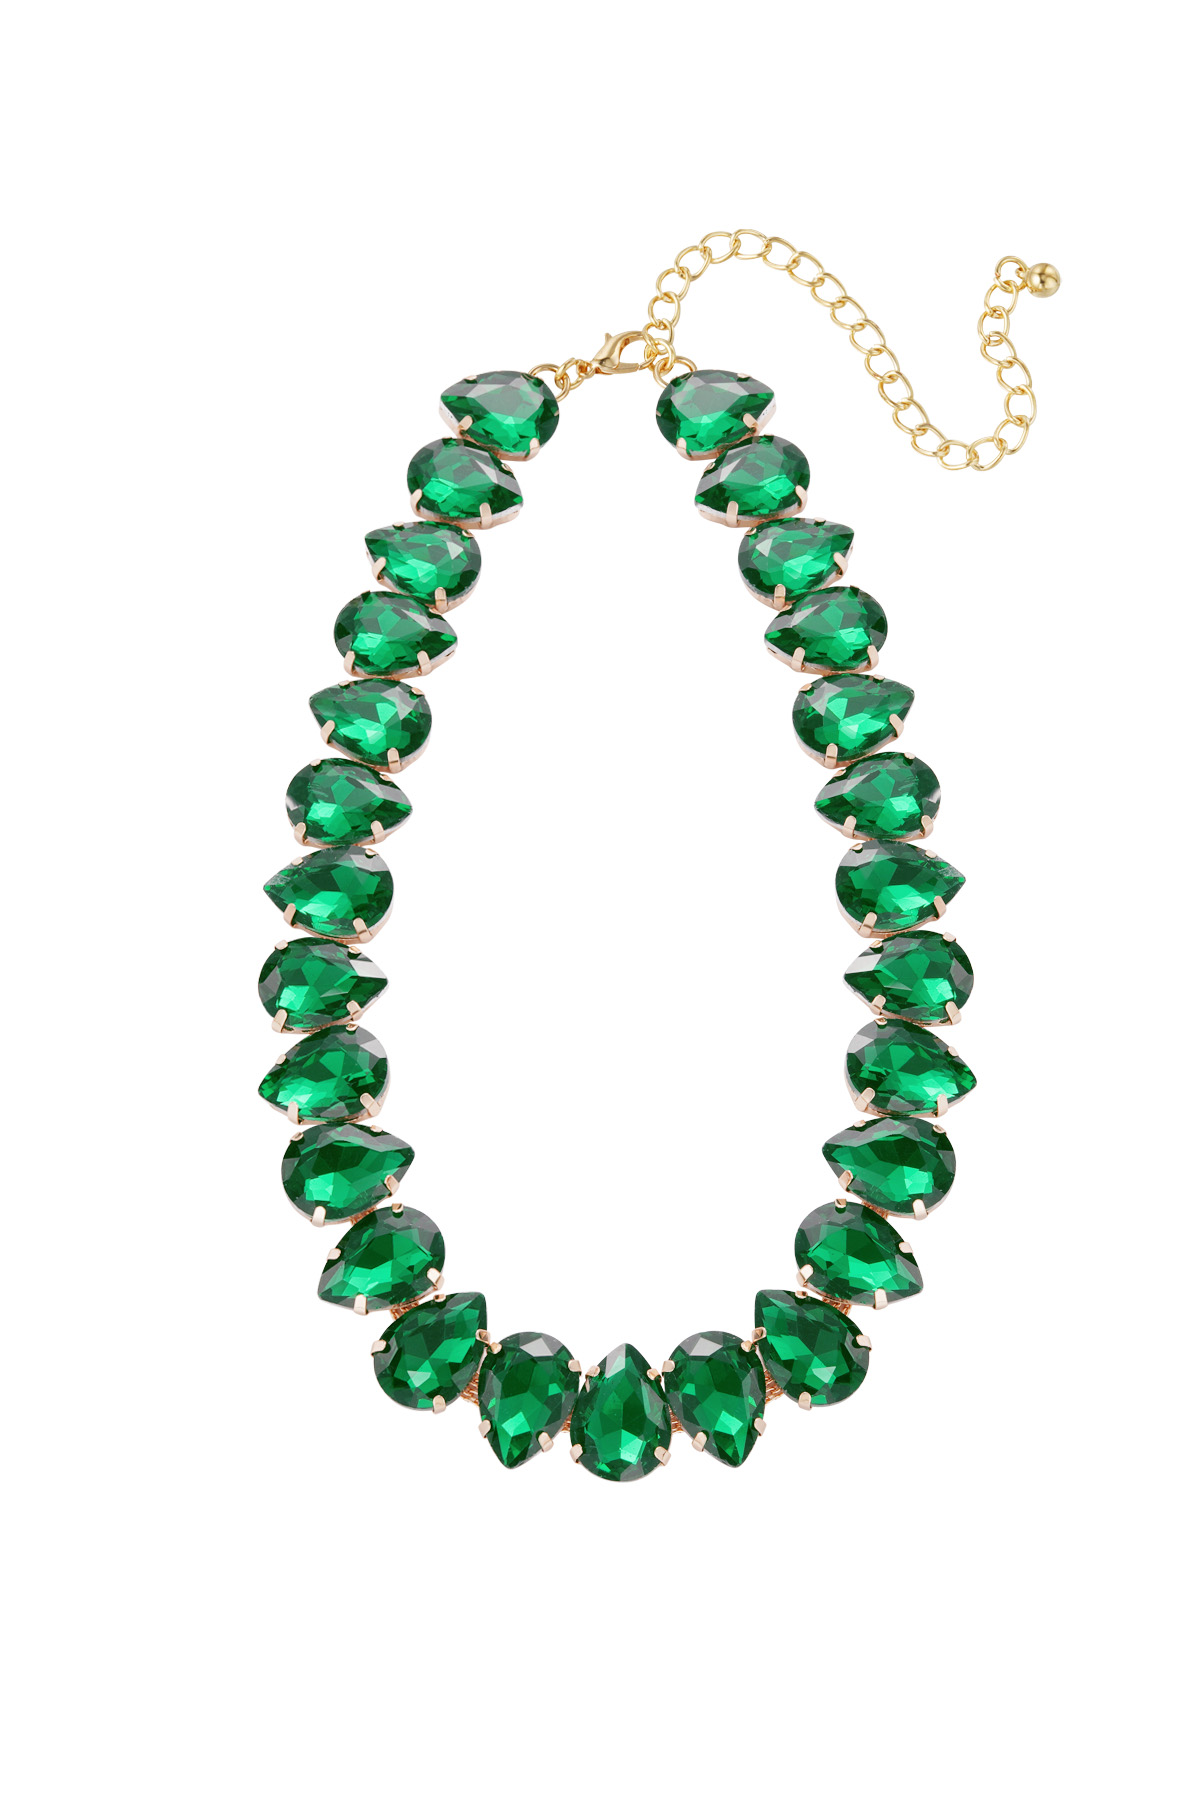 Necklace large beads - green